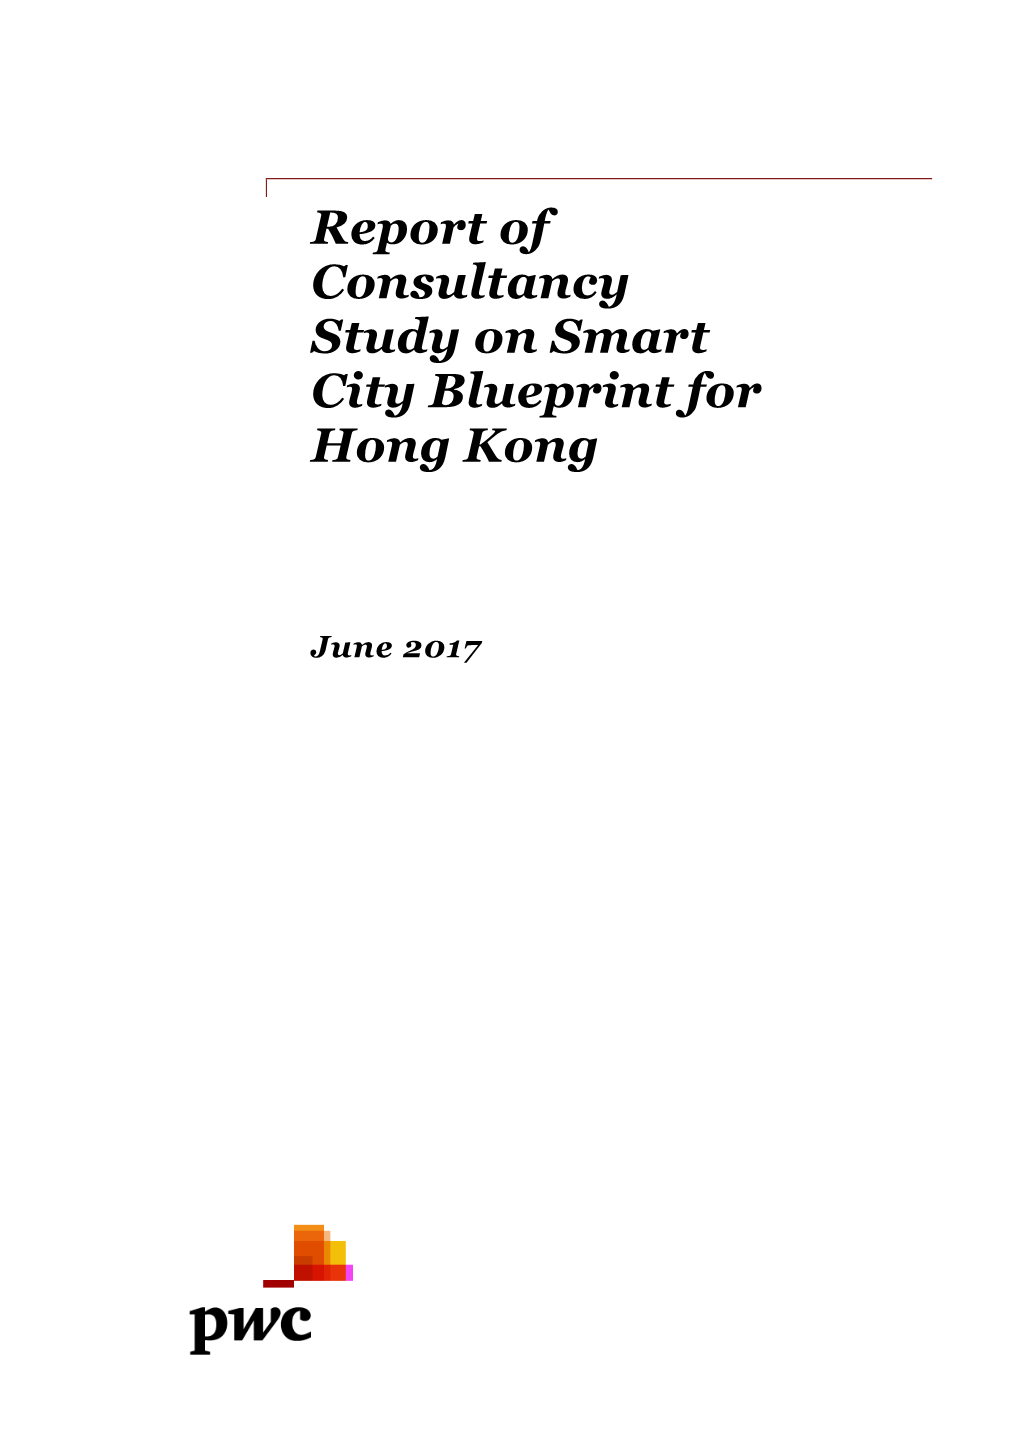 Report of Consultancy Study on Smart City Blueprint for Hong Kong